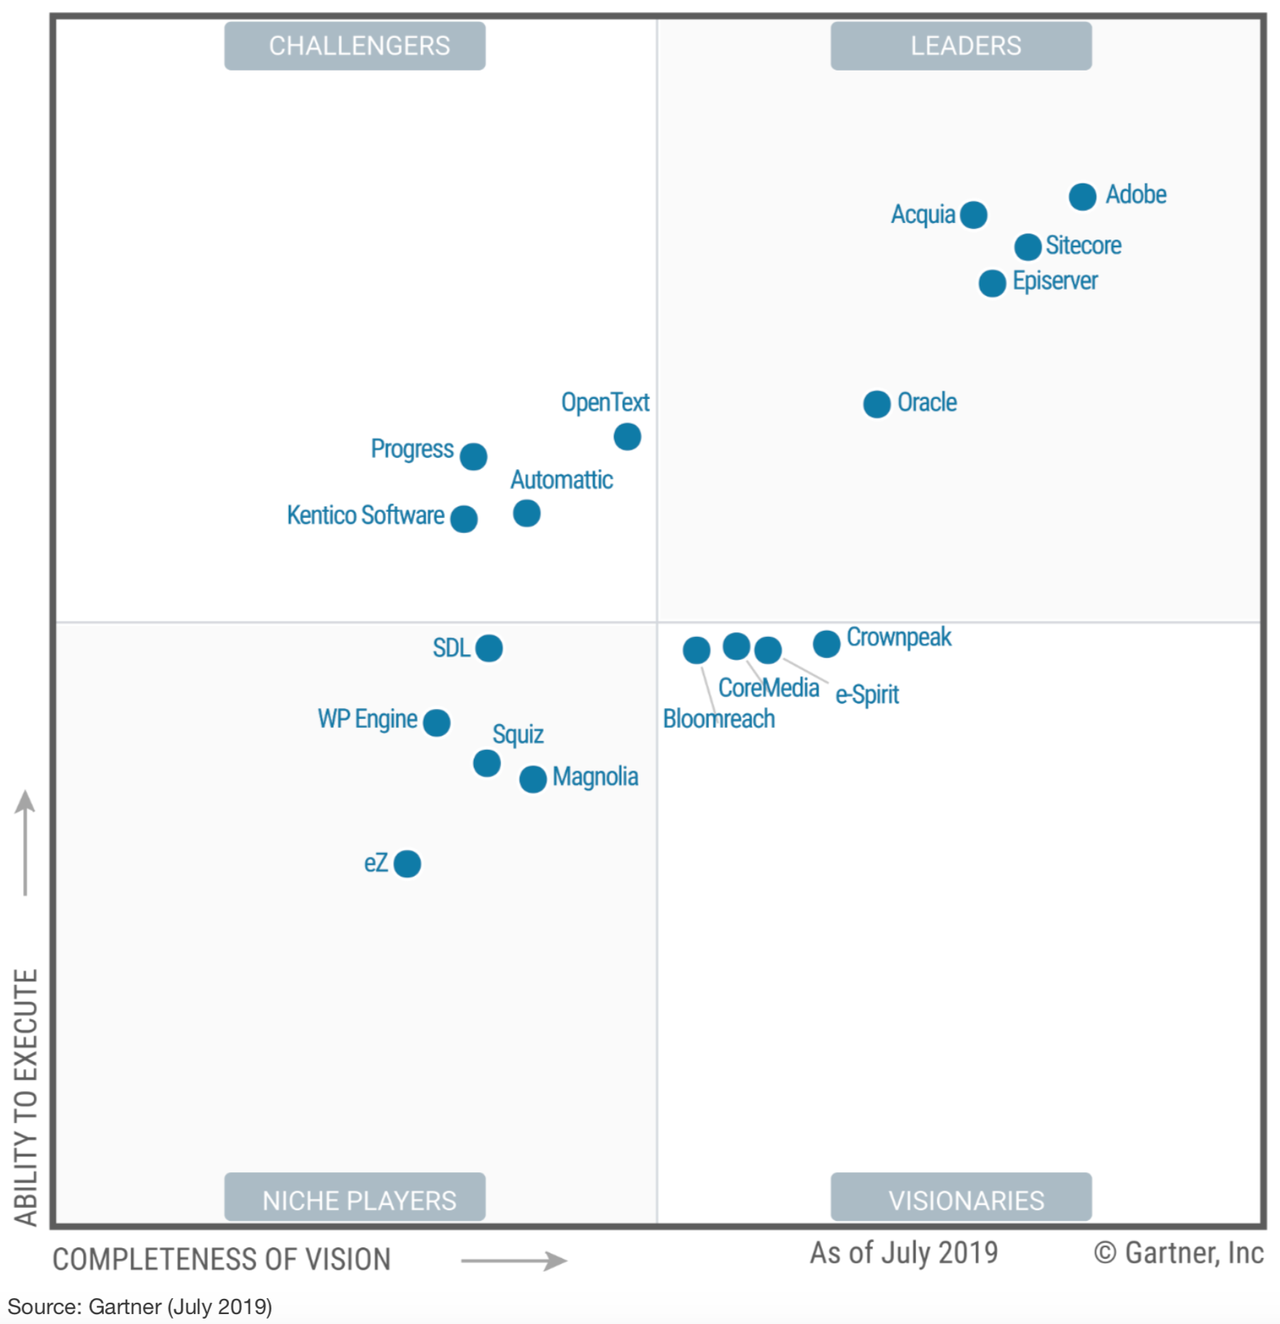 A graph showing the state of the Web Content Management market in 2019. Vendors are plotted on a grid based on their ability to execute and completeness of vision. Acquia is placed in the 'Leaders' quadrant, indicating strong performance in both vision and execution.